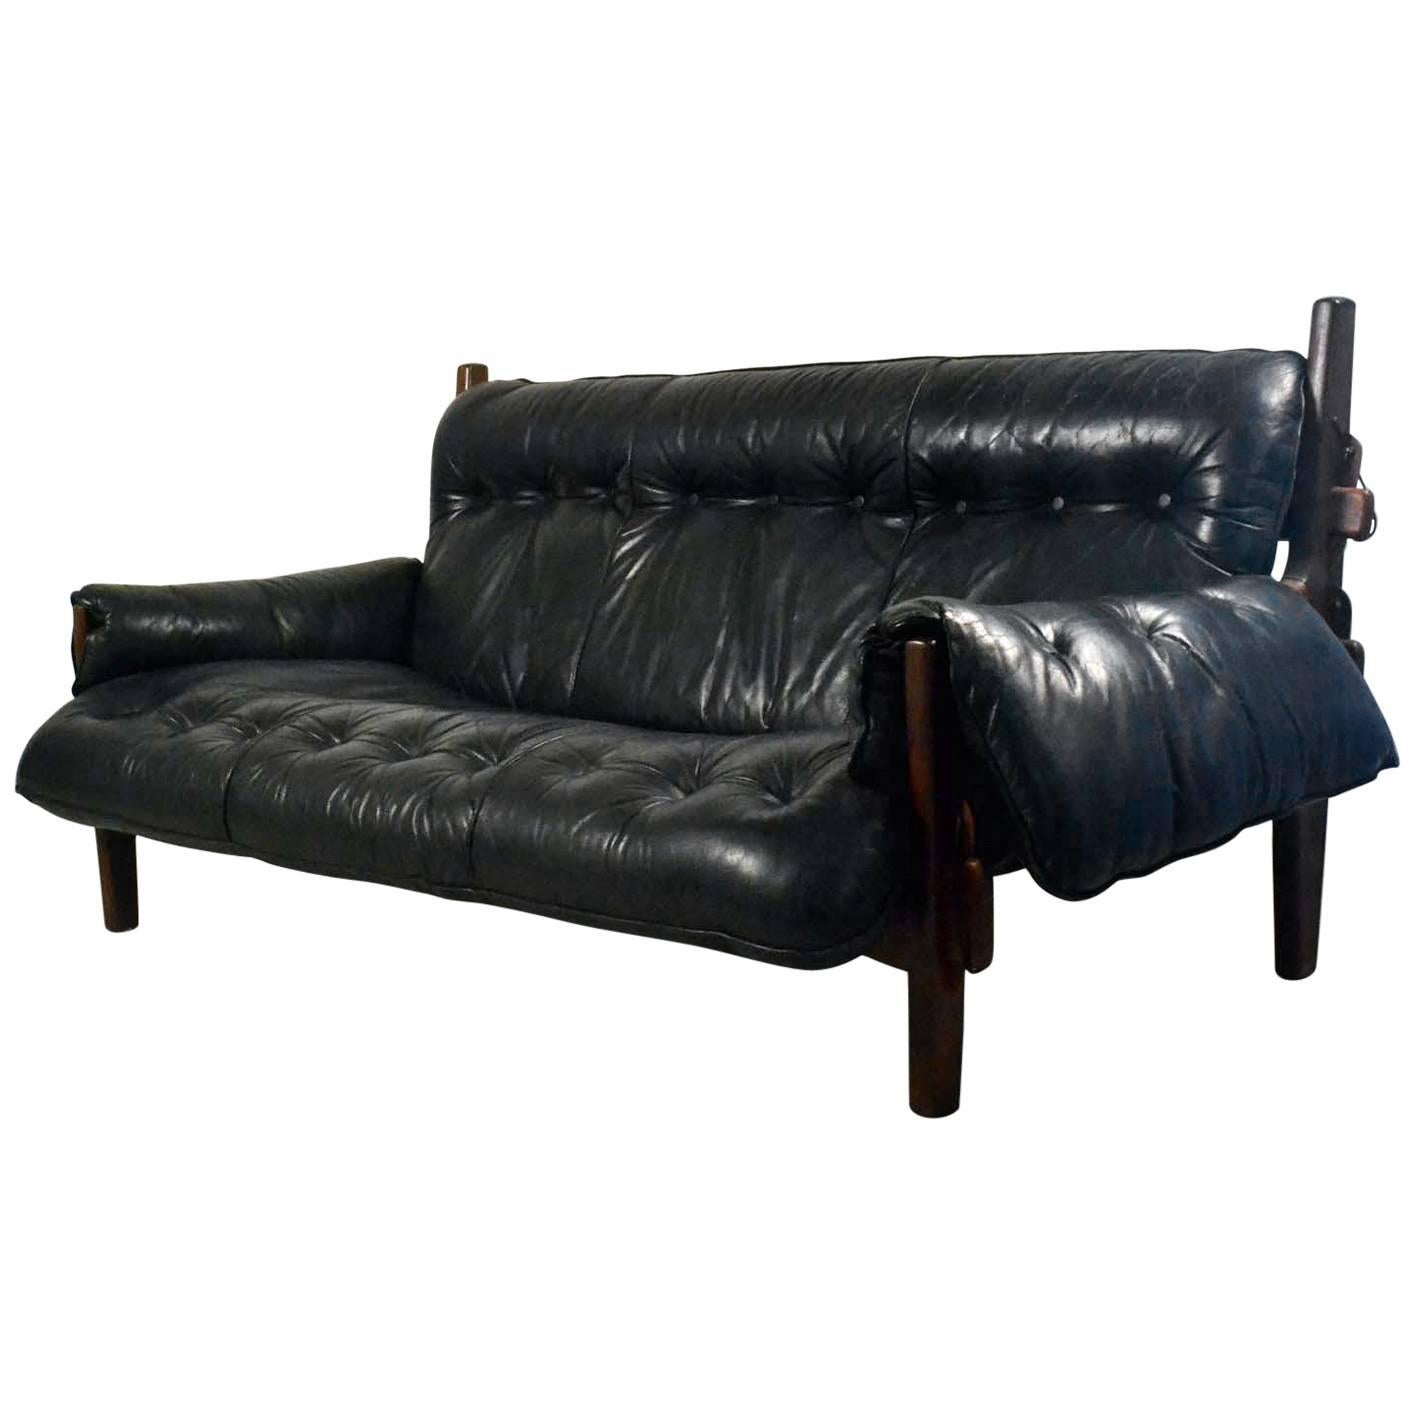 Early Mole Sofa by the Brazilian Sergio Rodrigues in Black Leather